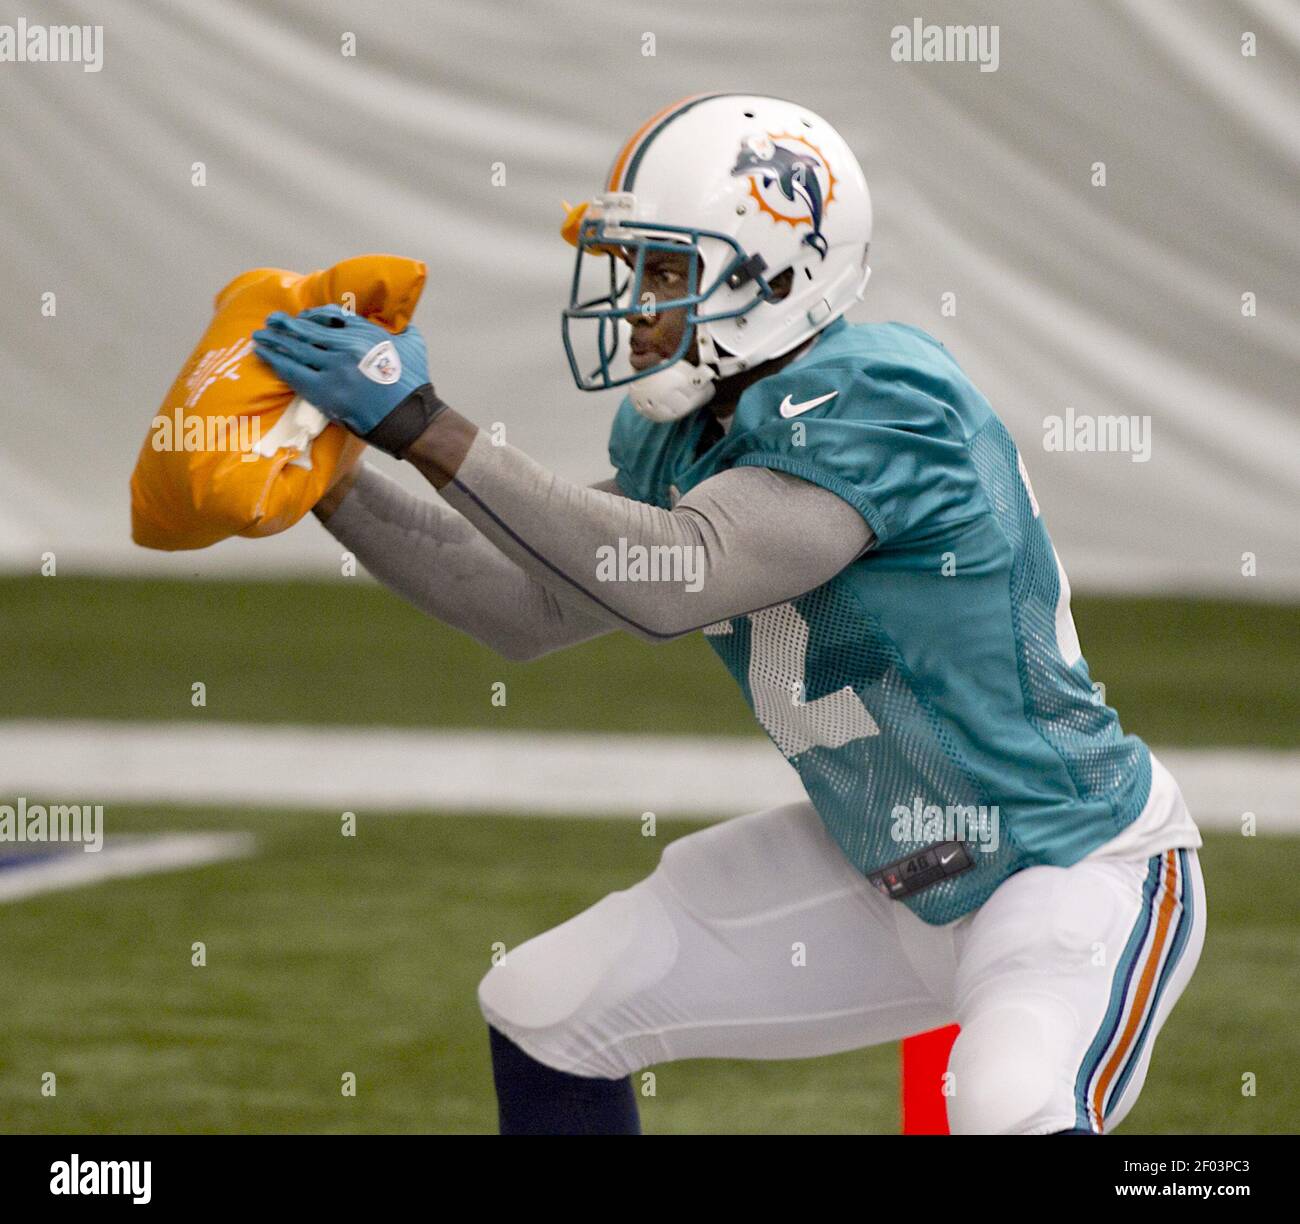 Miami Dolphins running back Reggie Bush works with a sandbag during  practice at Dolphins training camp at NSU in Davie, Florida, Monday, August  6, 2012. (Photo by Joe Rimkus Jr./Miami Herald/MCT/Sipa USA